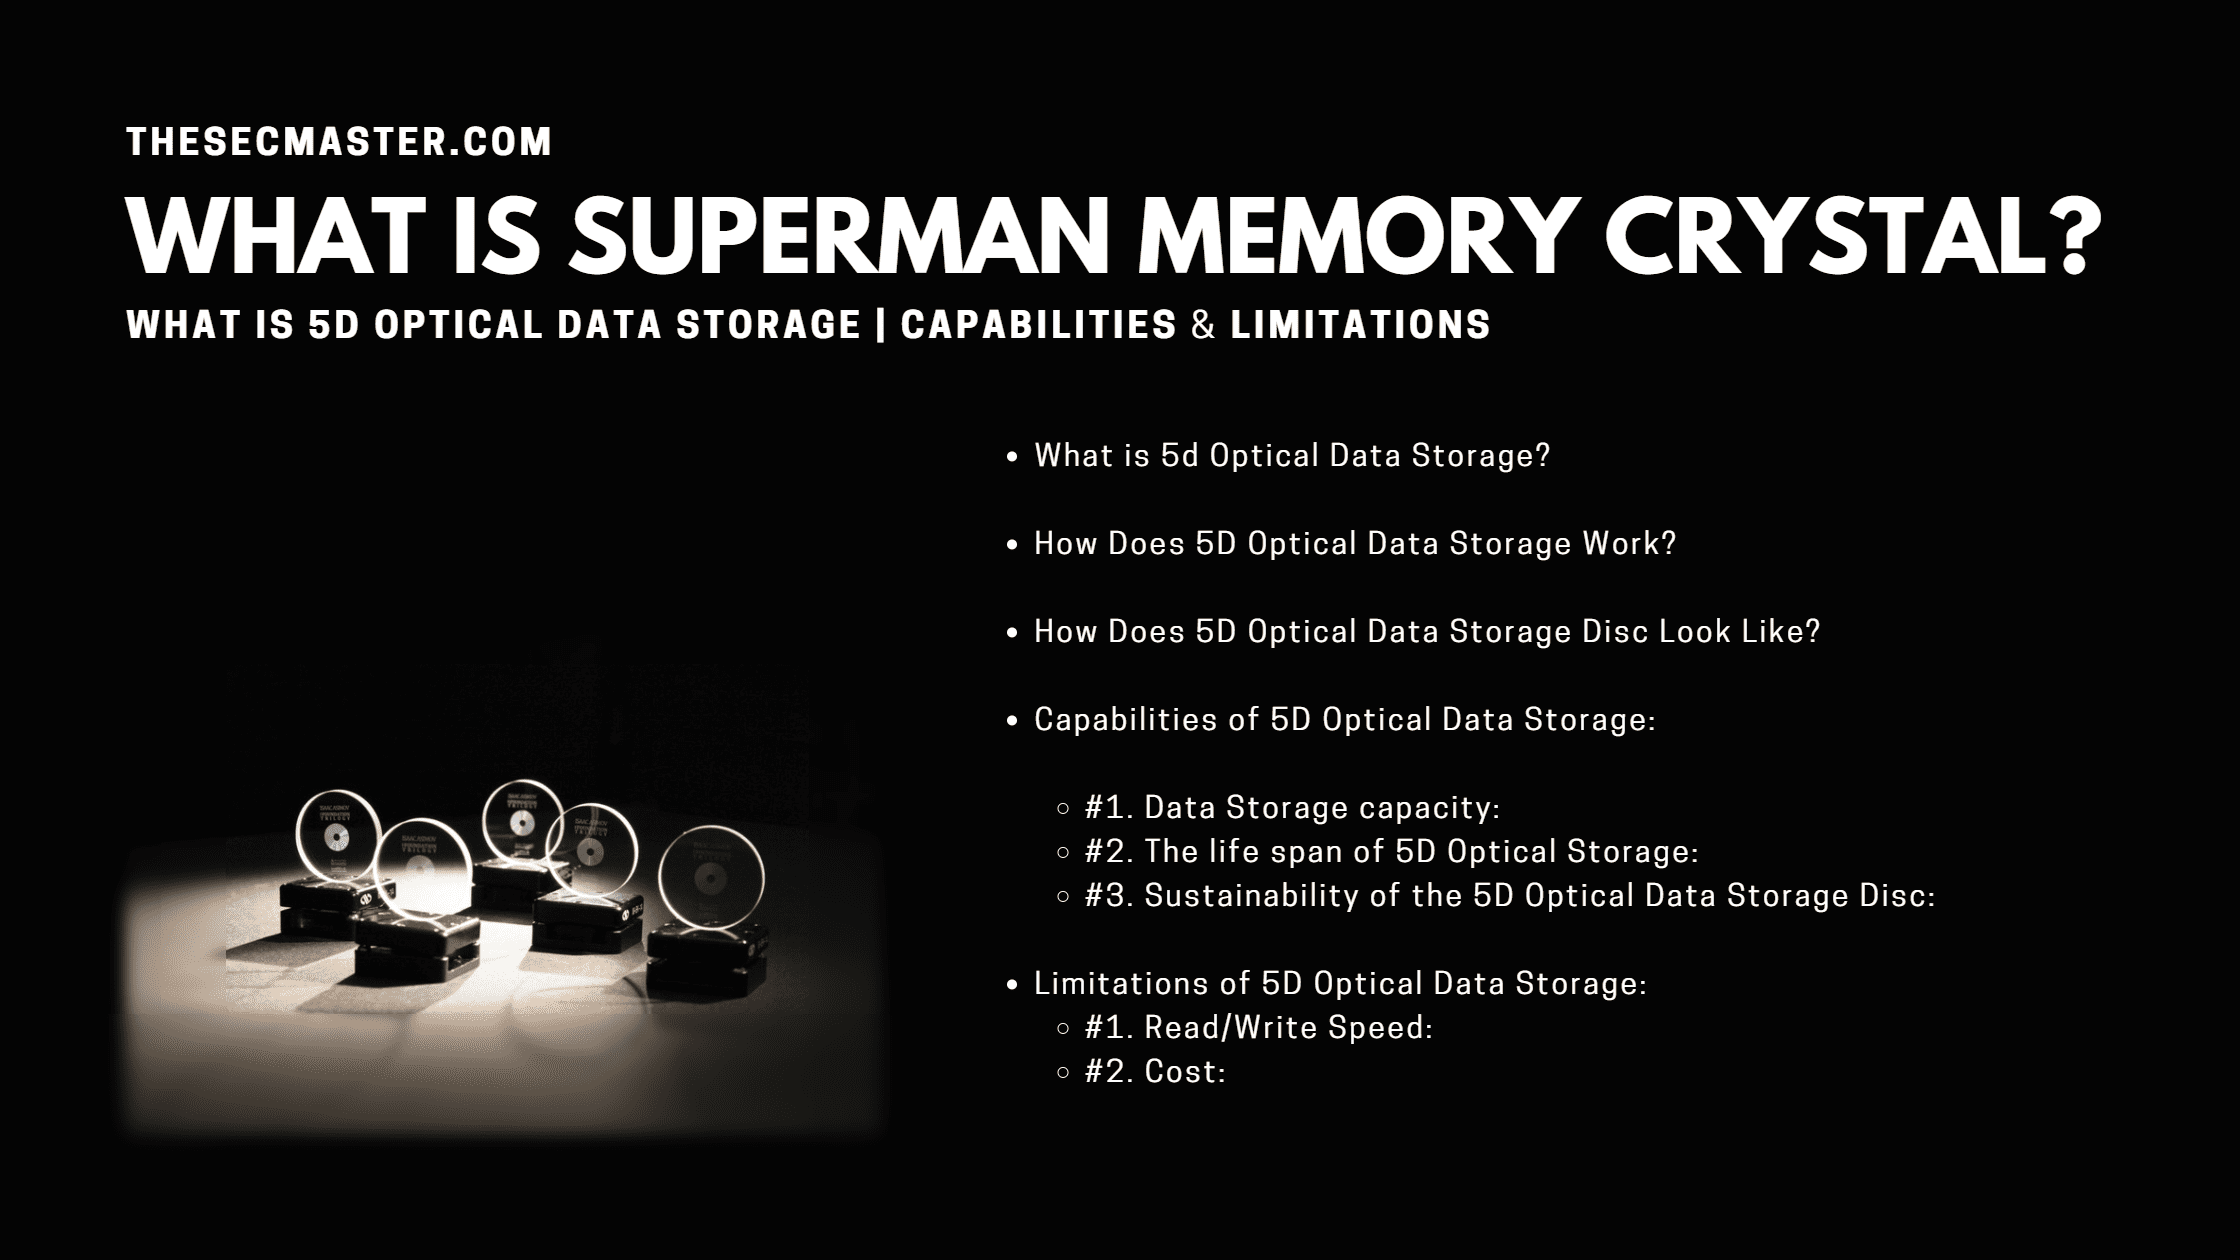 What Is 5d Optical Data Storage Alias Superman Memory Crystal